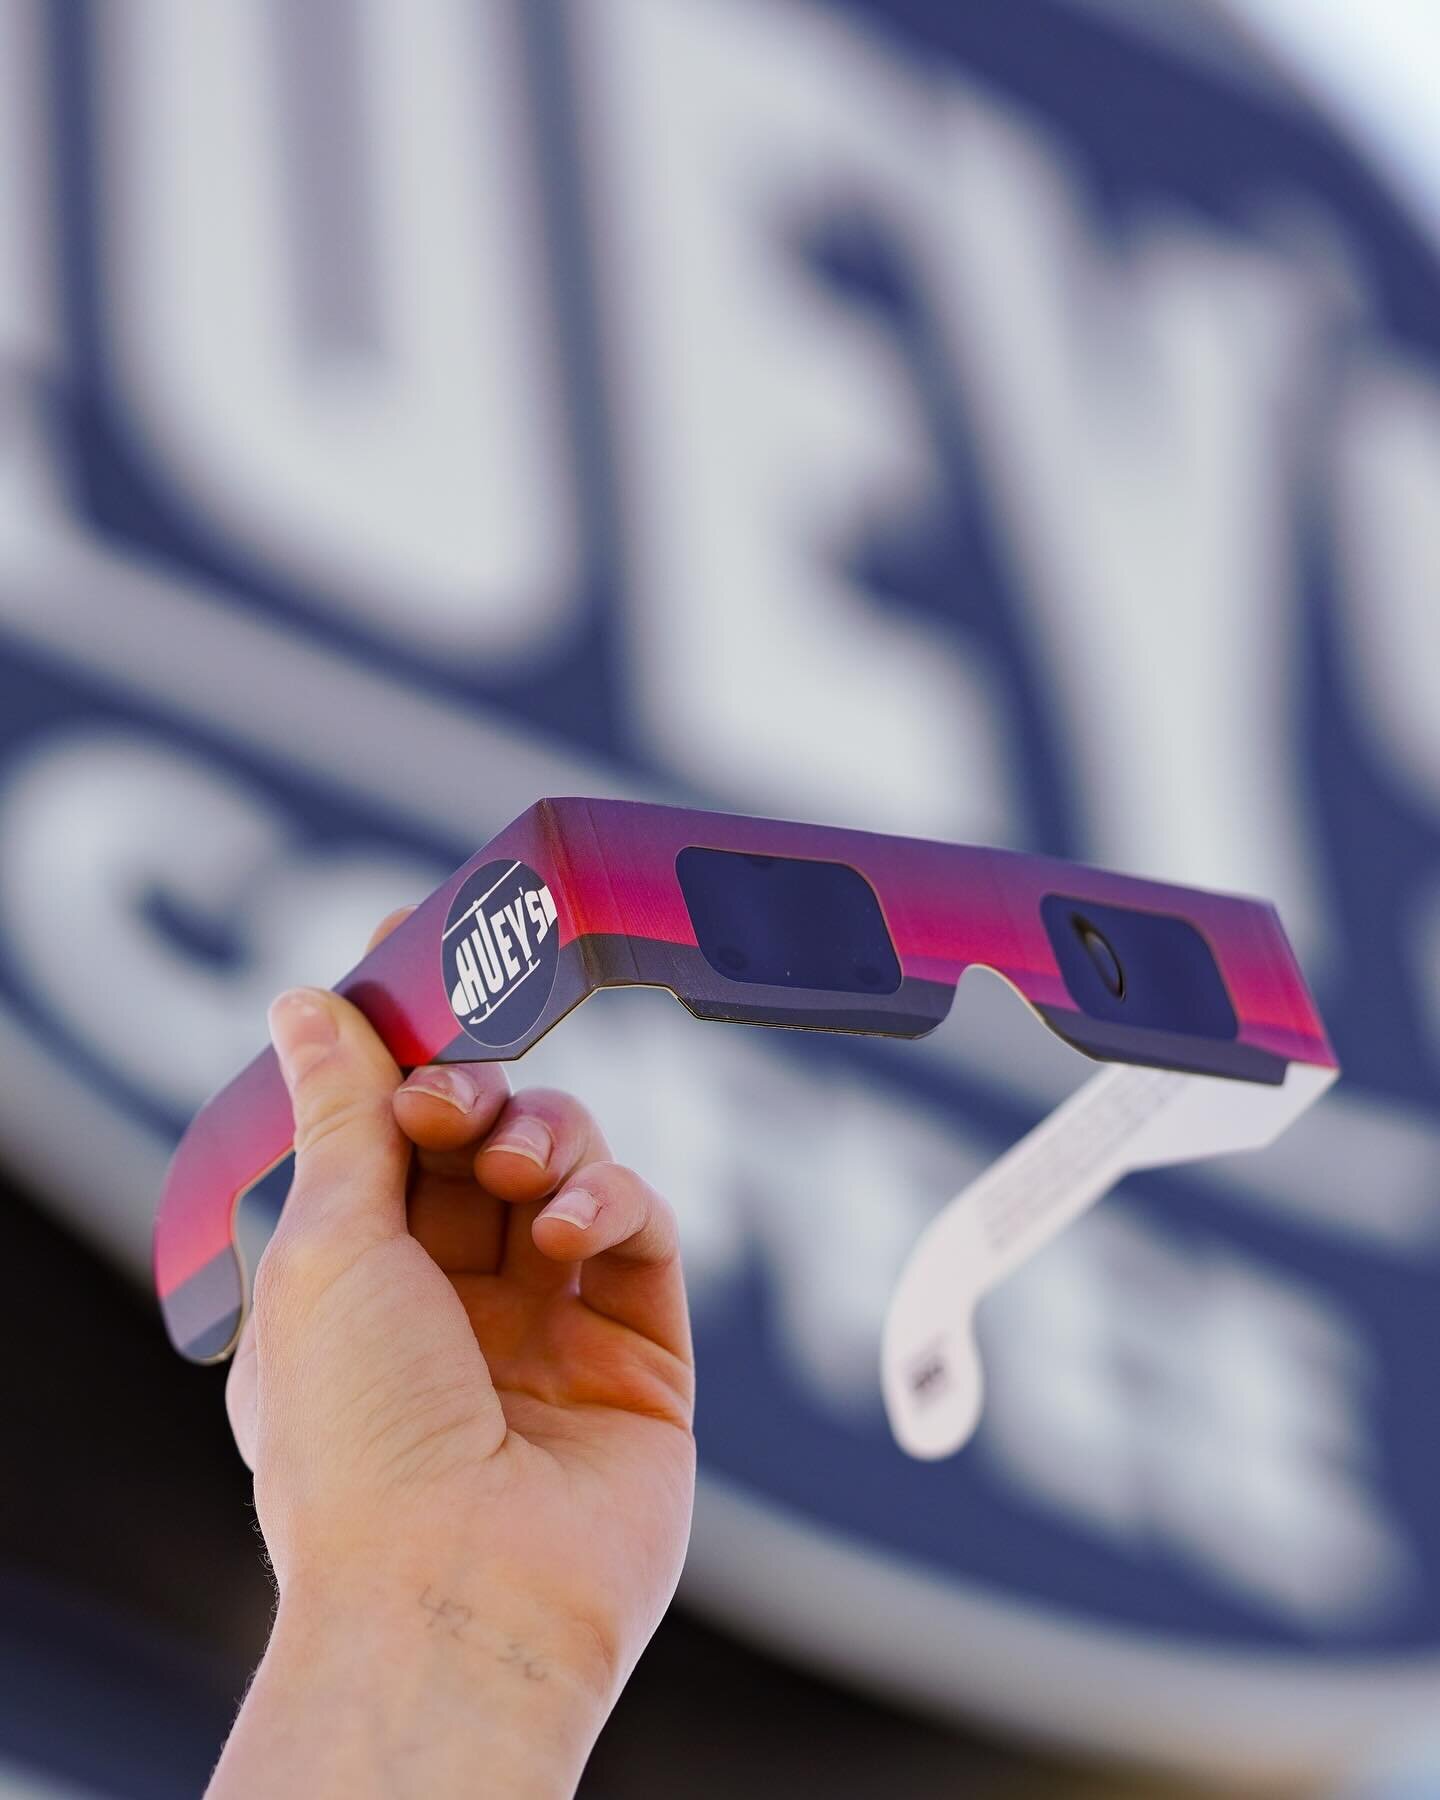 Tomorrow we are giving away Huey&rsquo;s eclipse glasses with a $10 purchase! We have a limited supply, so get yours tomorrow!
&bull;
&bull;
&bull;
#hueys #hueyscoffee #eclipse2024